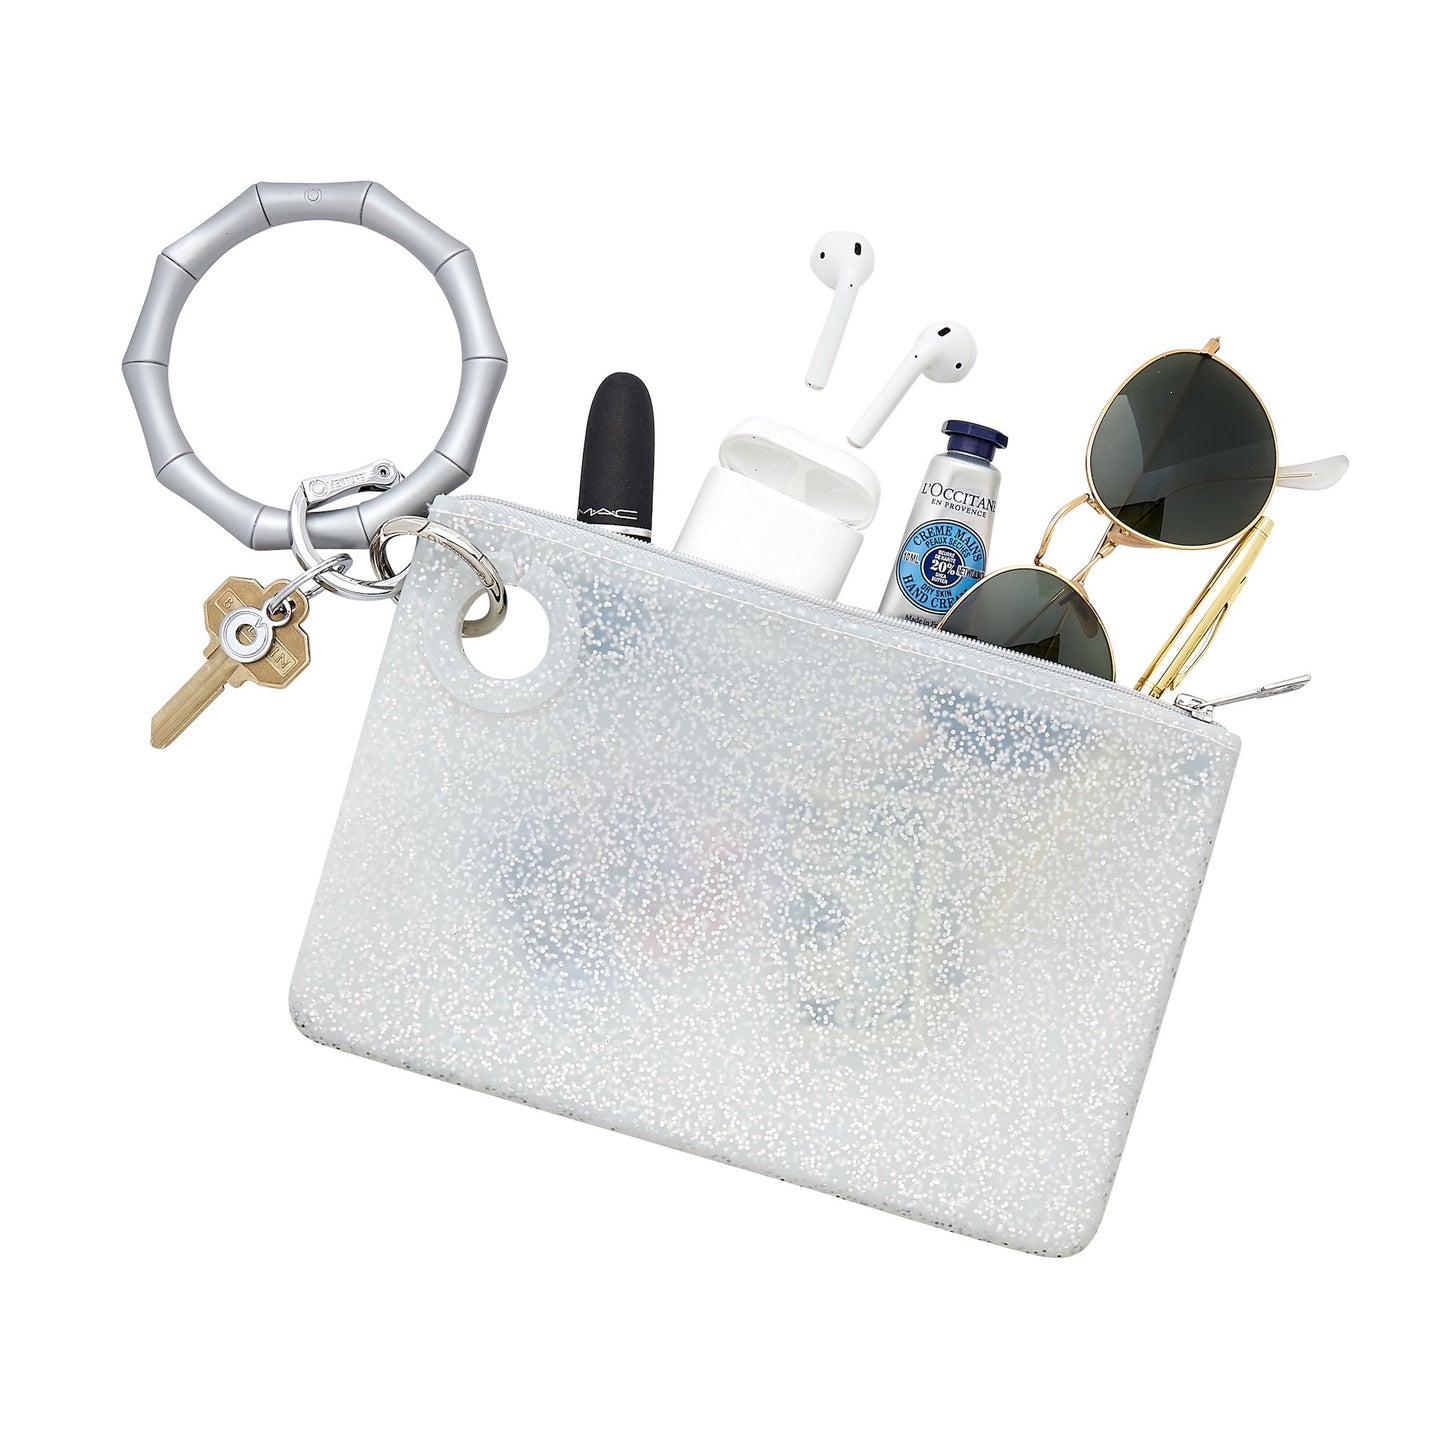 Large Silicone Oventure Pouch in quicksilver with silver confetti with solid quicksilver bamboo silicone key ring and accessories coming out of the pouch